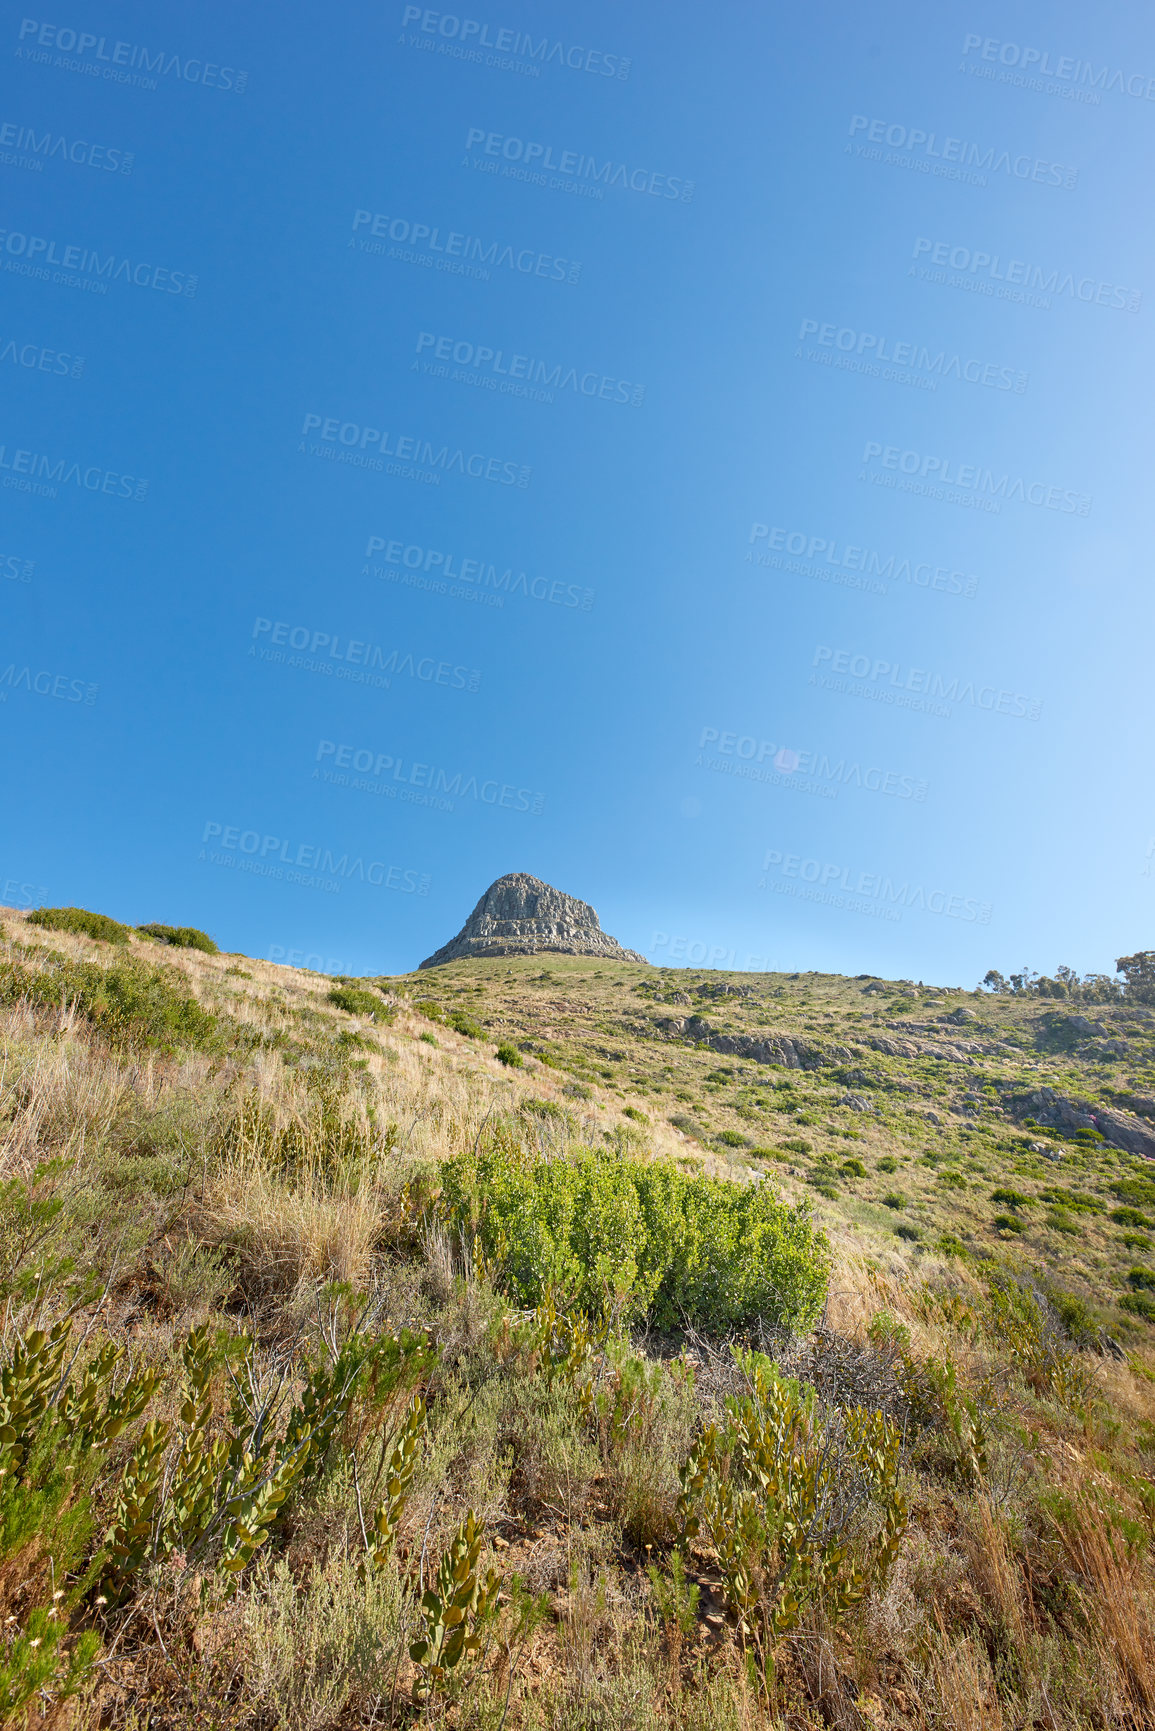 Buy stock photo Copyspace with scenic landscape of Lions Head mountain in Cape Town South Africa against a clear blue sky background. Magnificent panoramic of plants growing around a famous landmark and destination